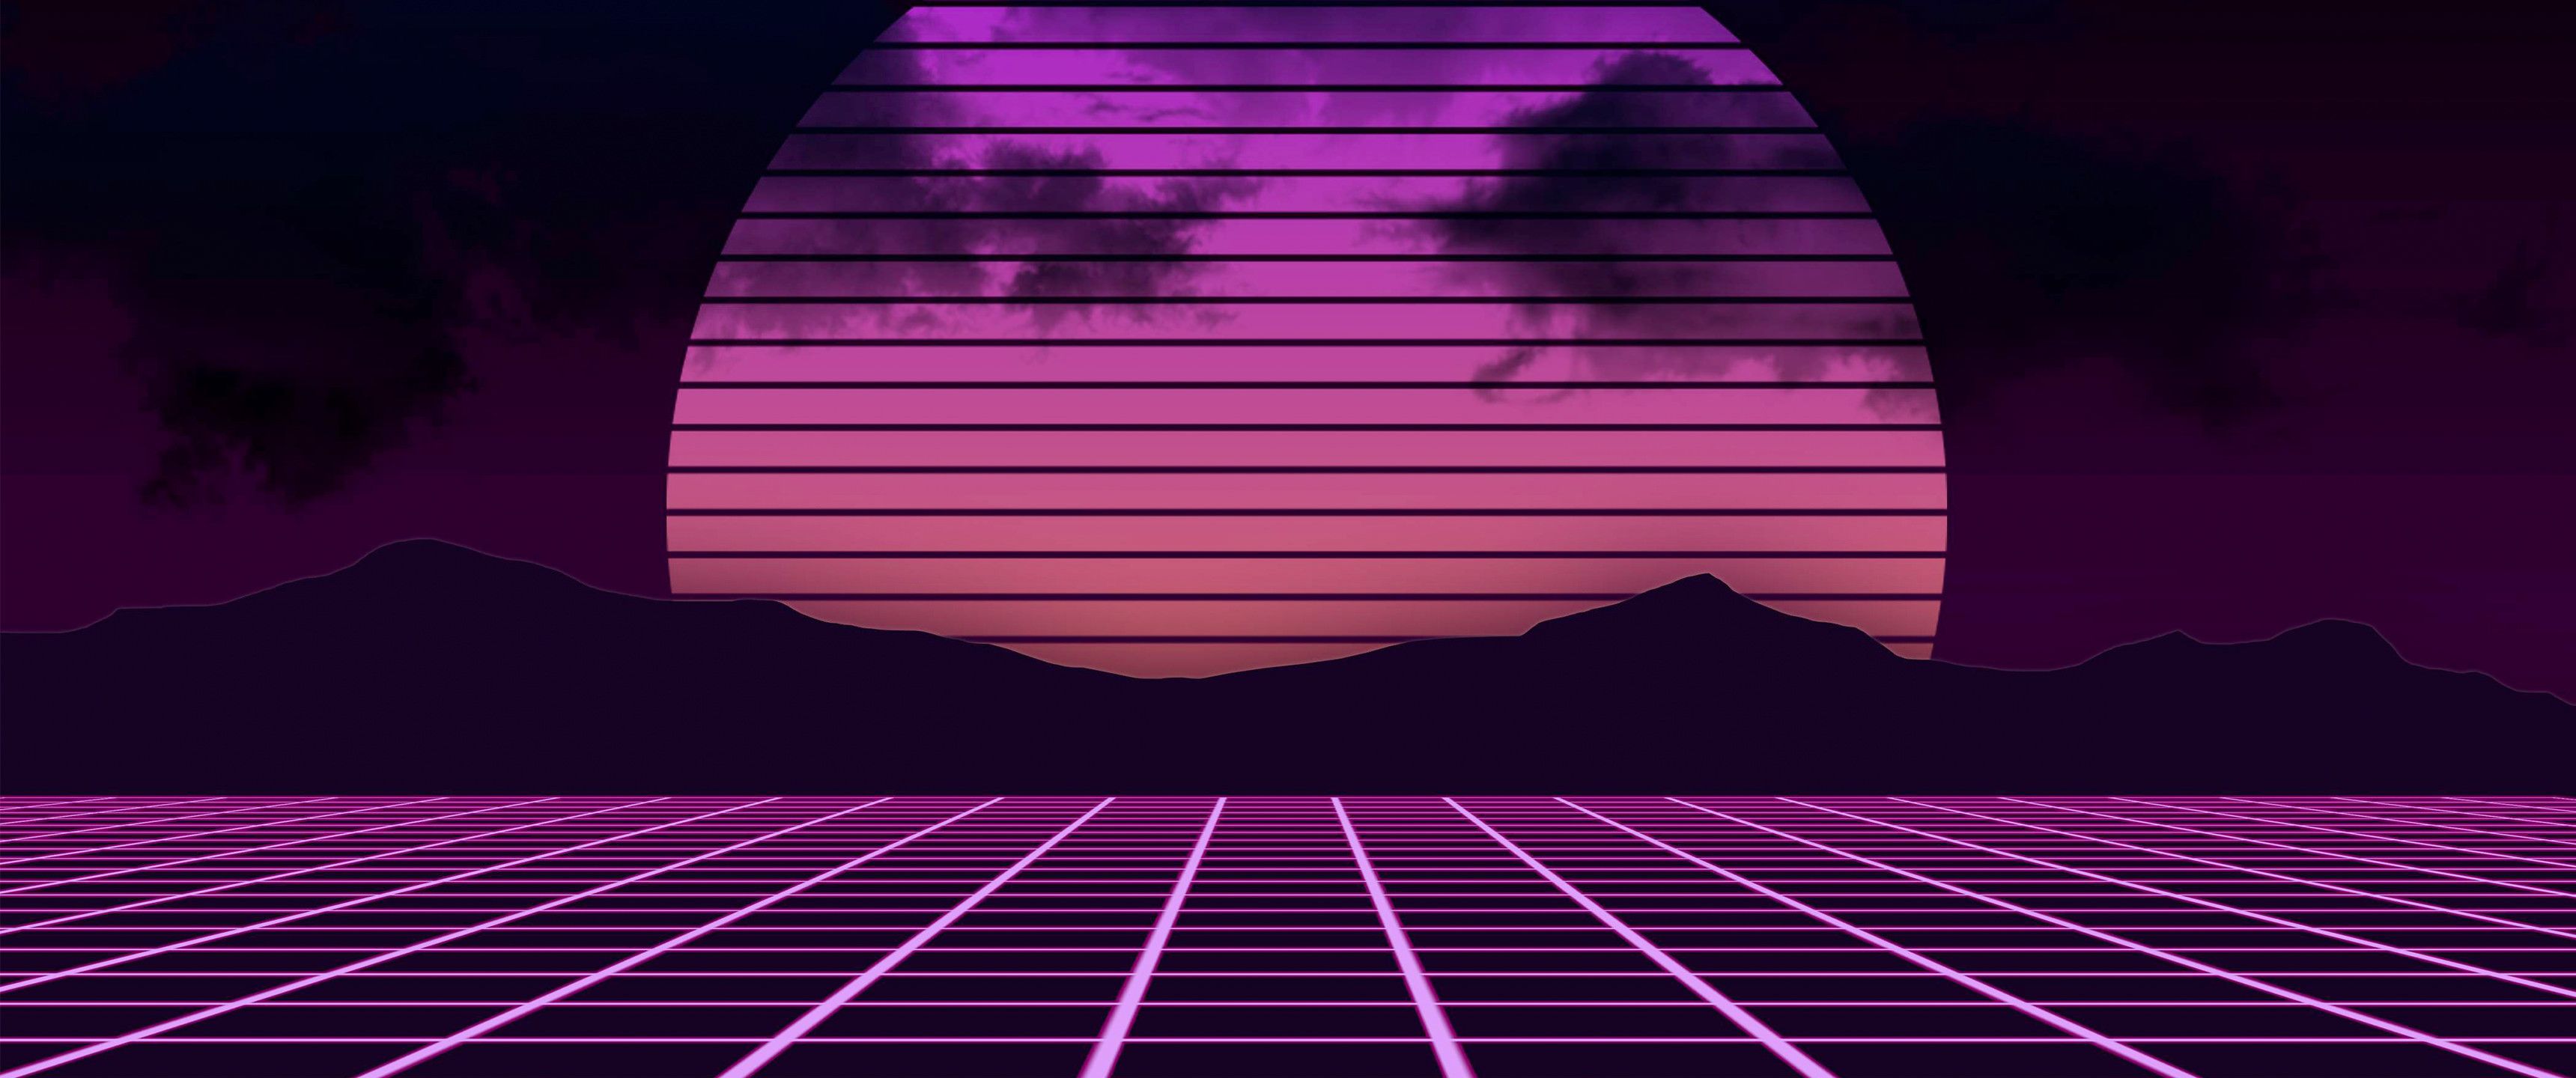 3440x [request] Post Your 80s Wallpaper